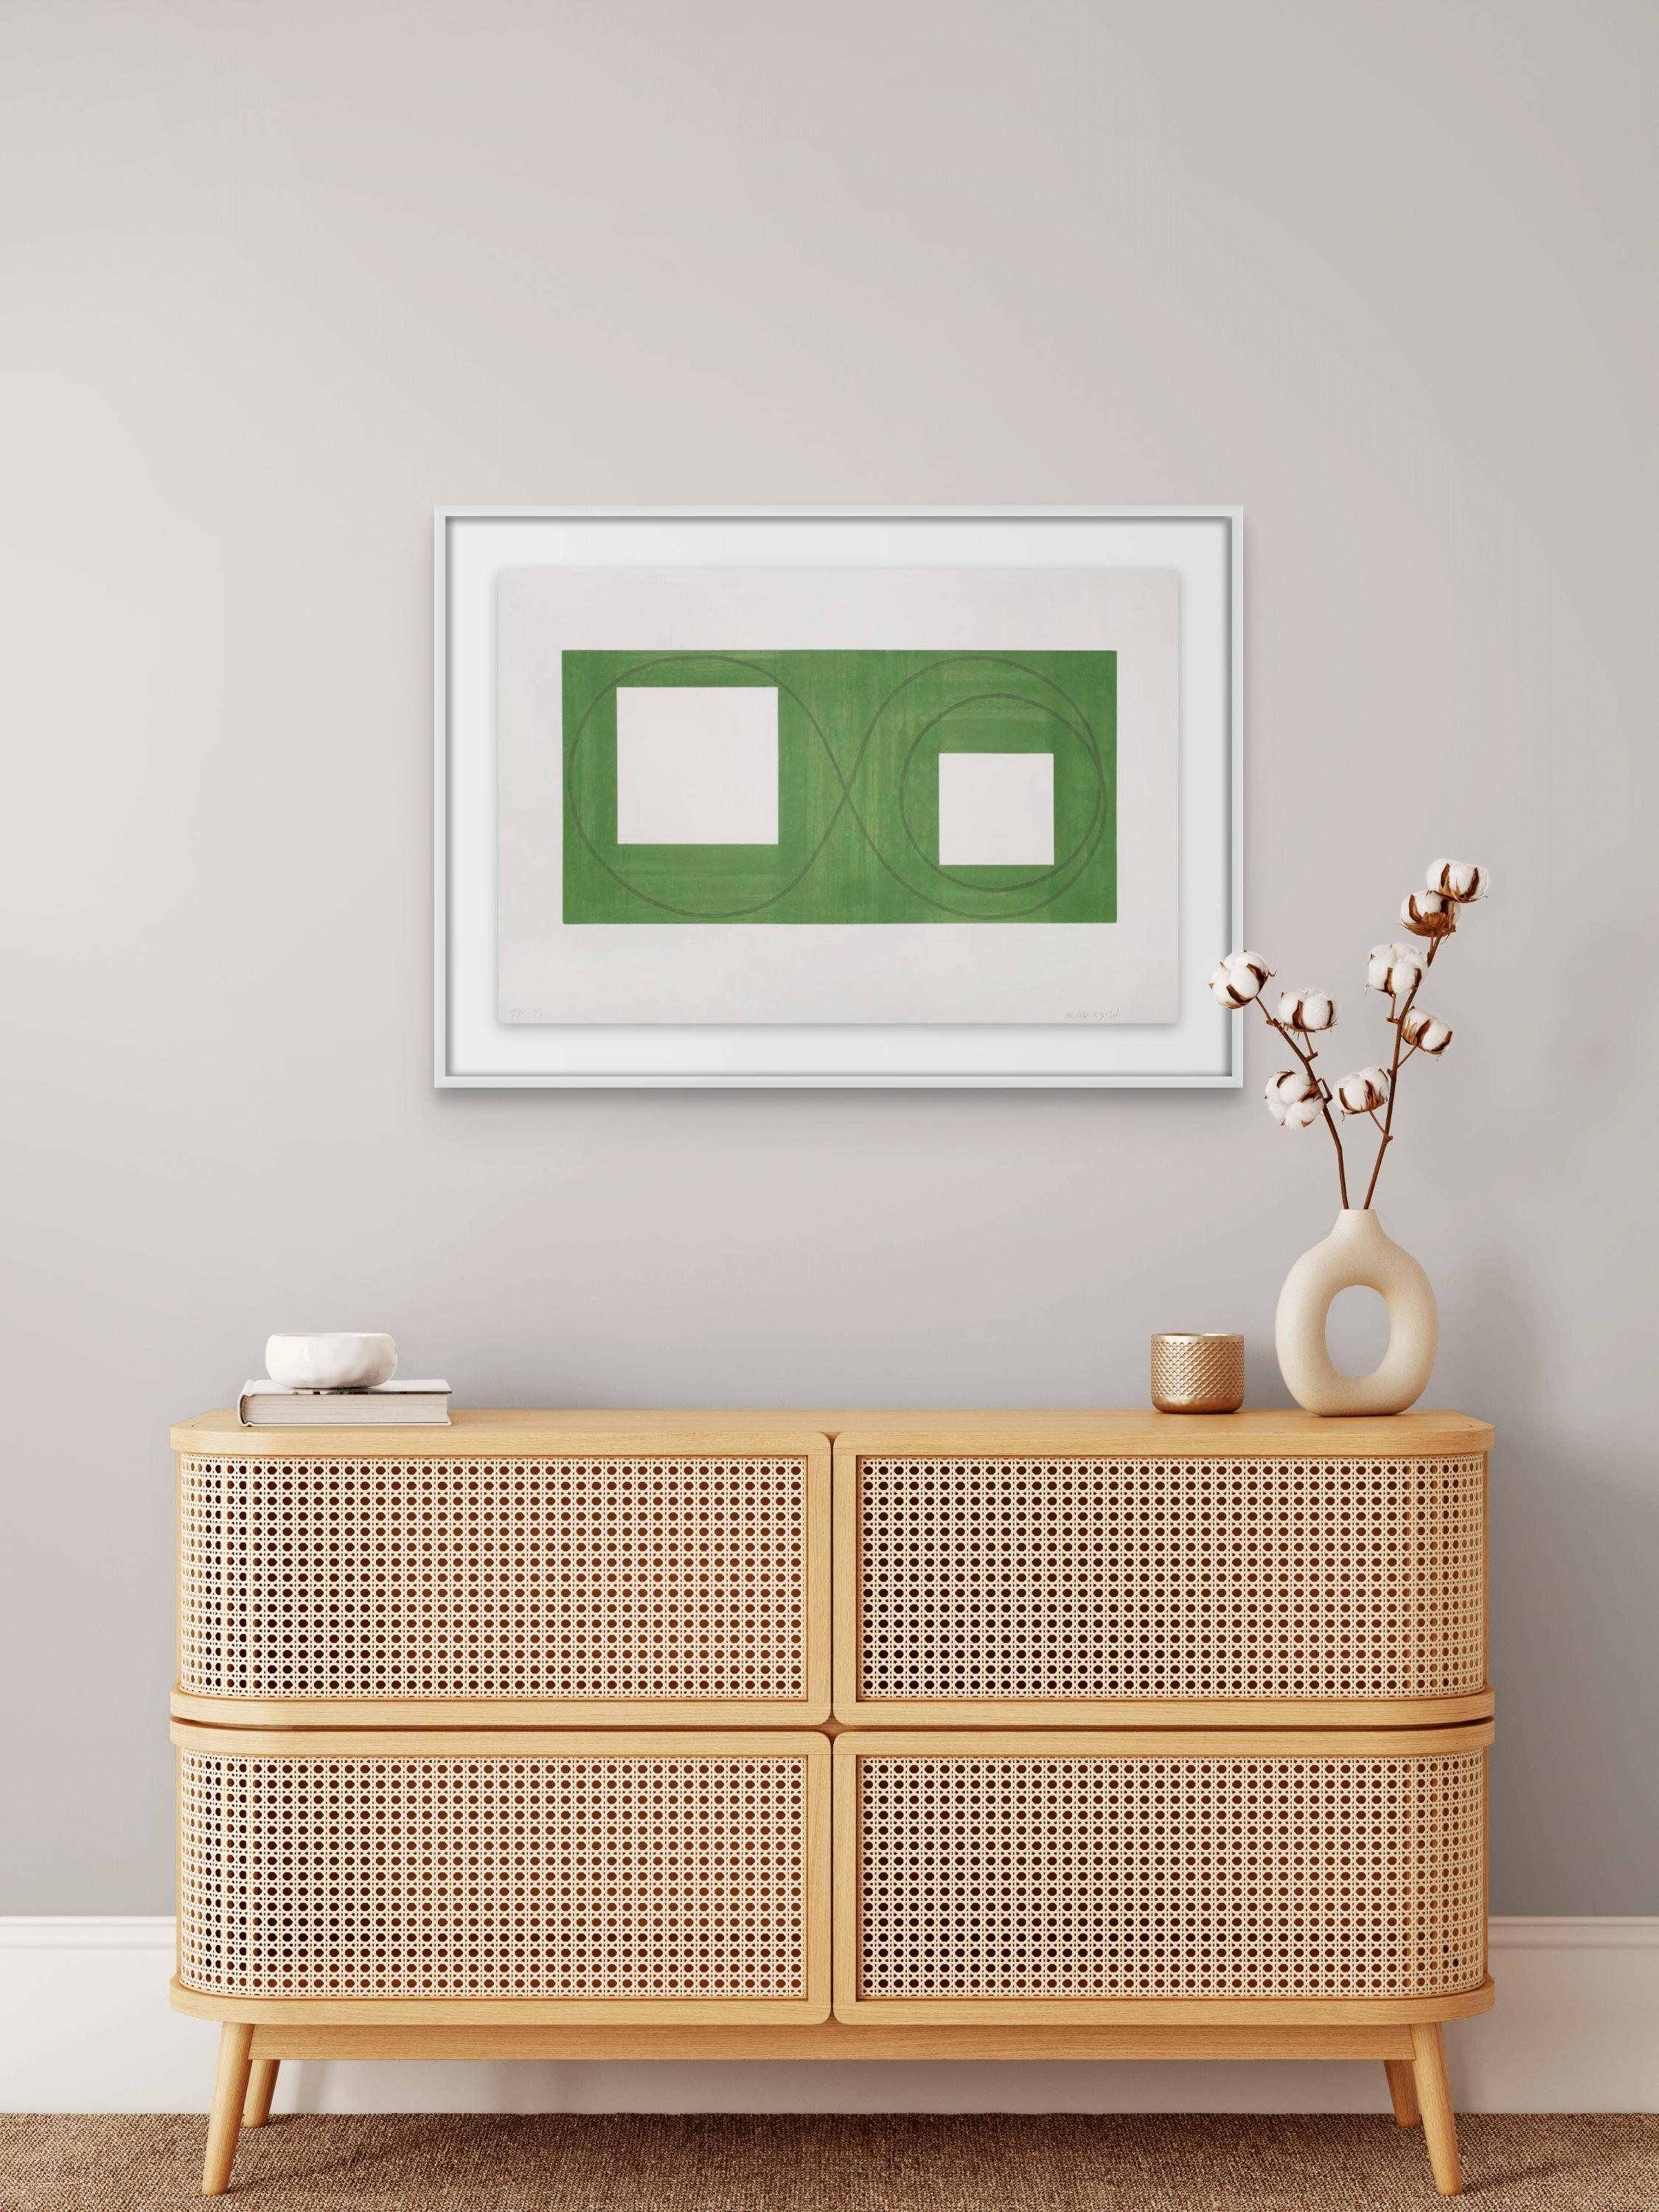 Two Open Squares Within a Green Area - Print by Robert Mangold